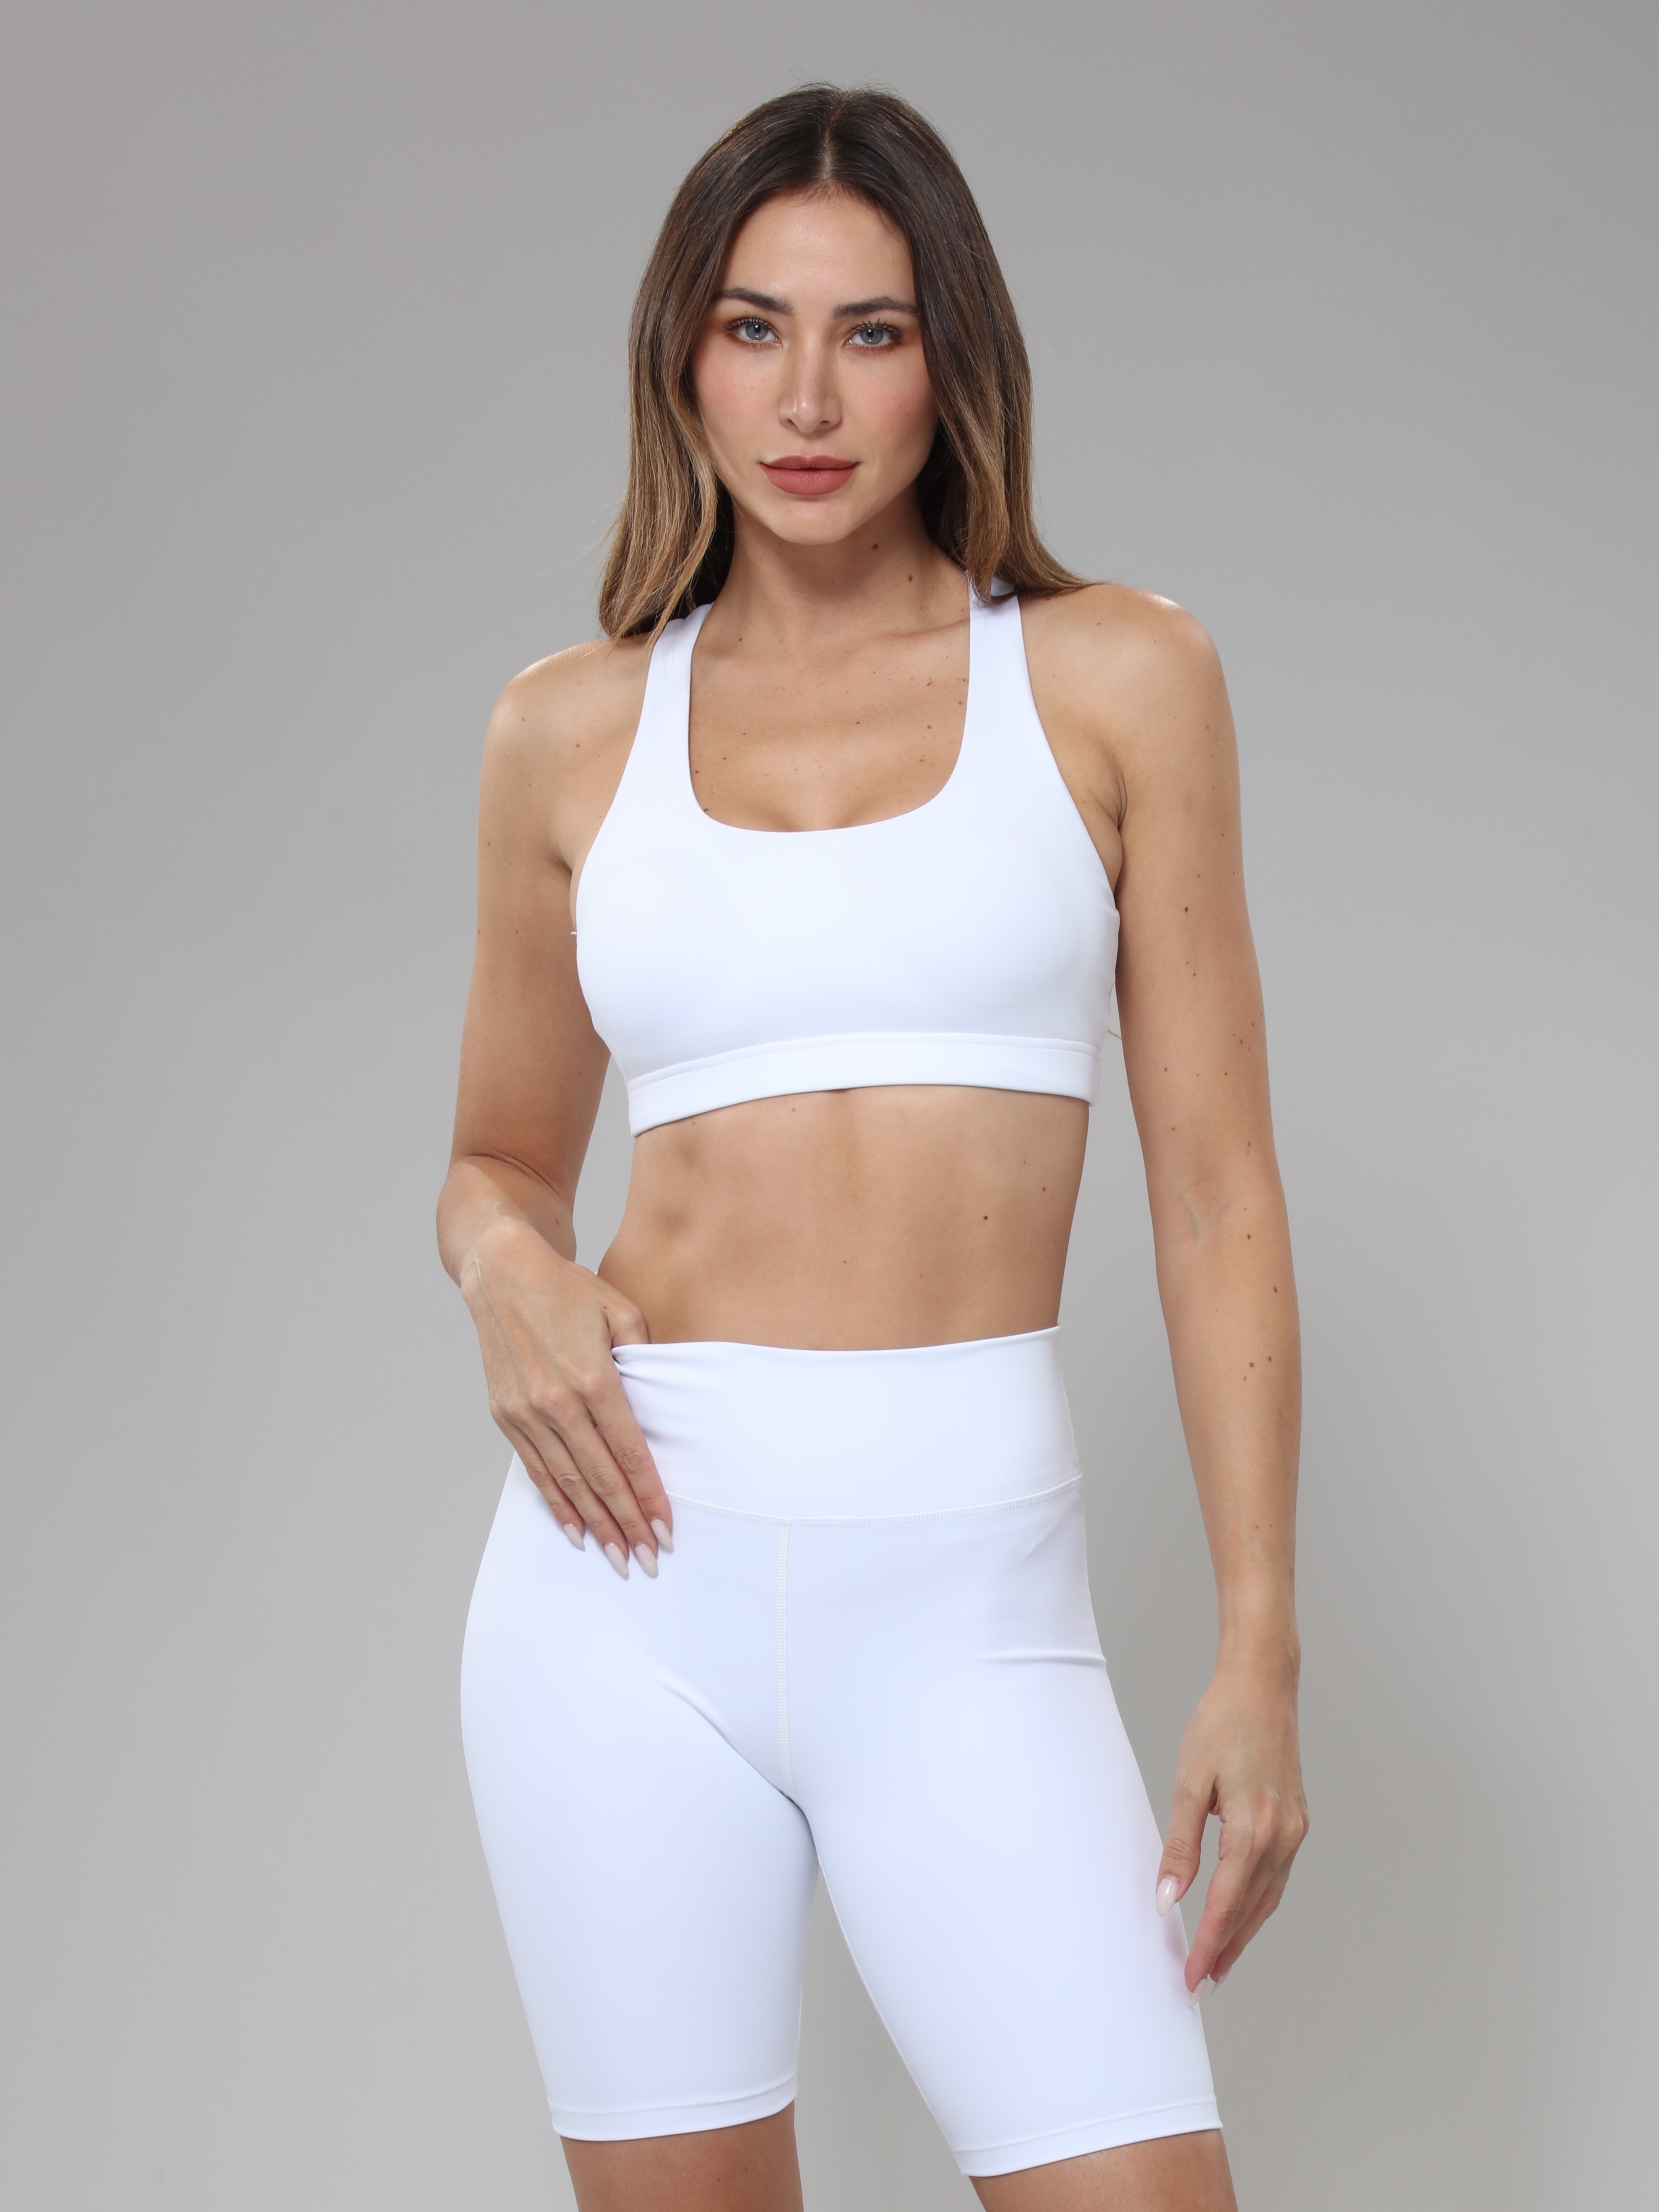 Racerback Ribbed Wireless Bra Comfy Breathable Full Coverage